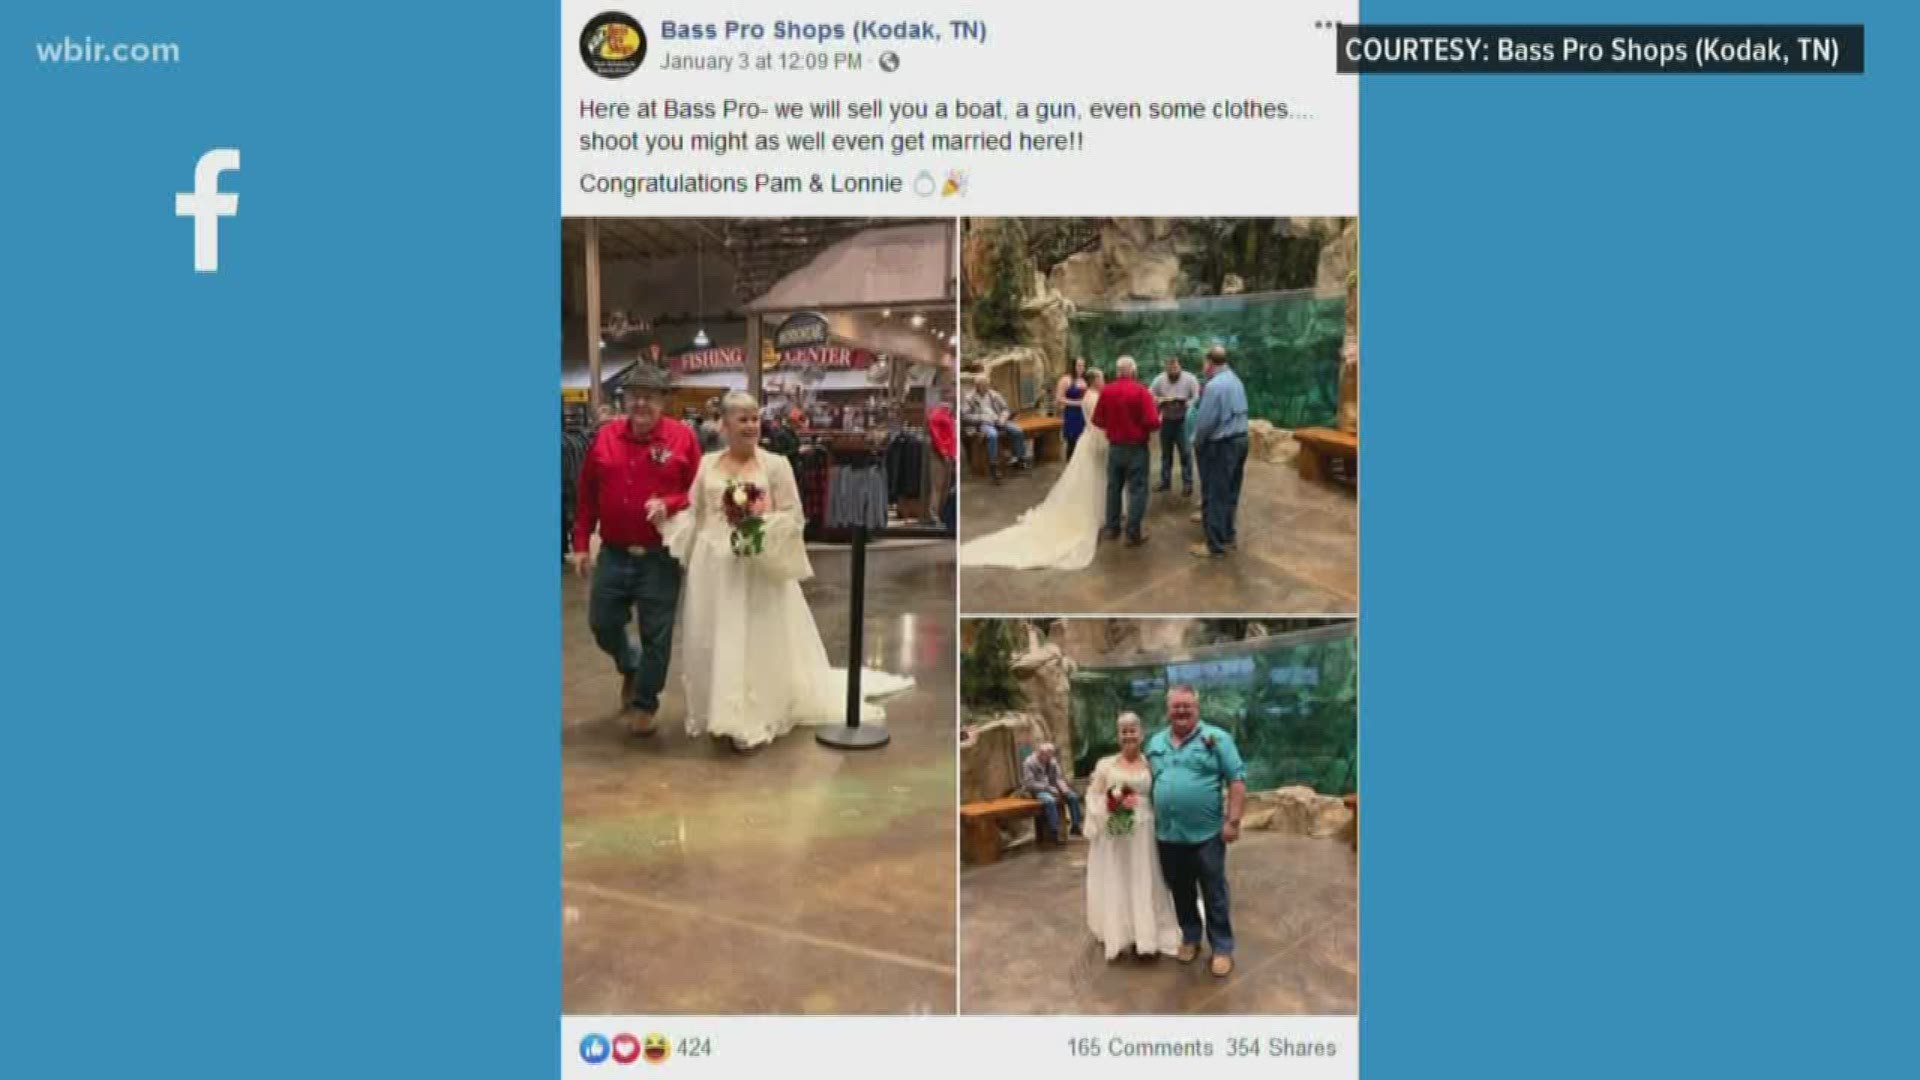 Some stores seem to sell everything. A Bass Pro Shops in Kodak, TN, even offered its aisles as a marriage venue.